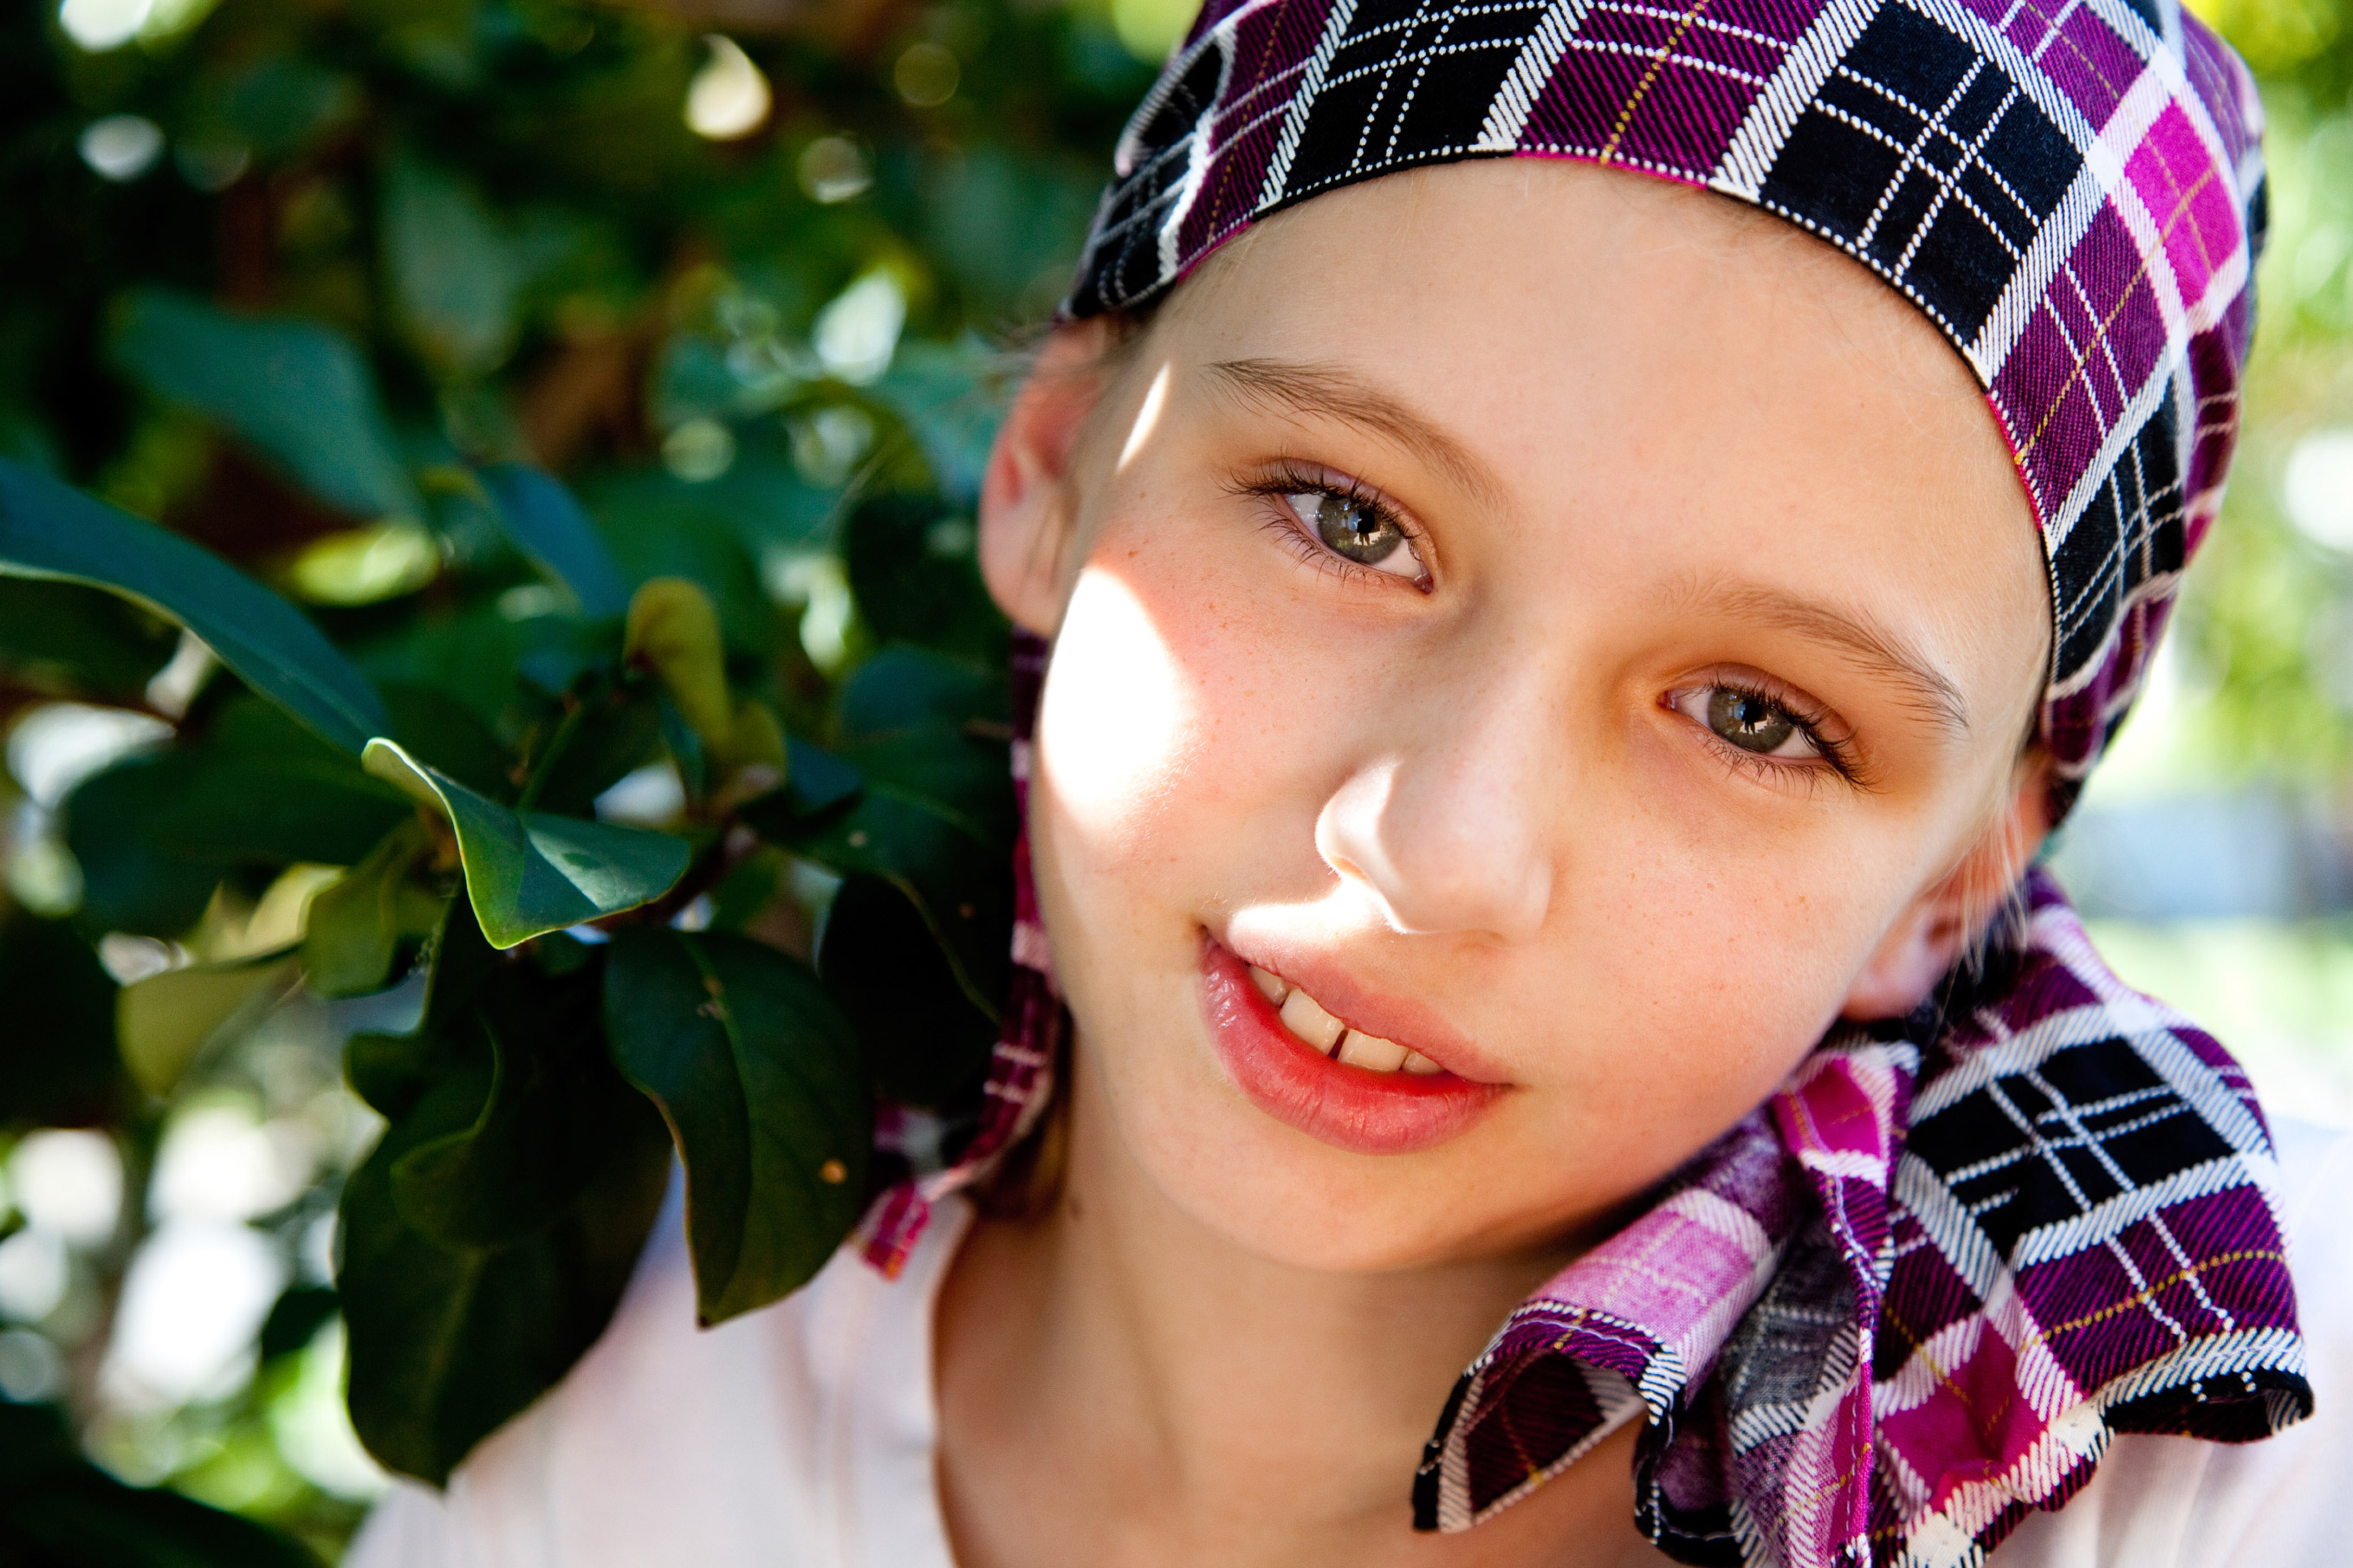 Photo of a young girl wearing a headscarf, smiling